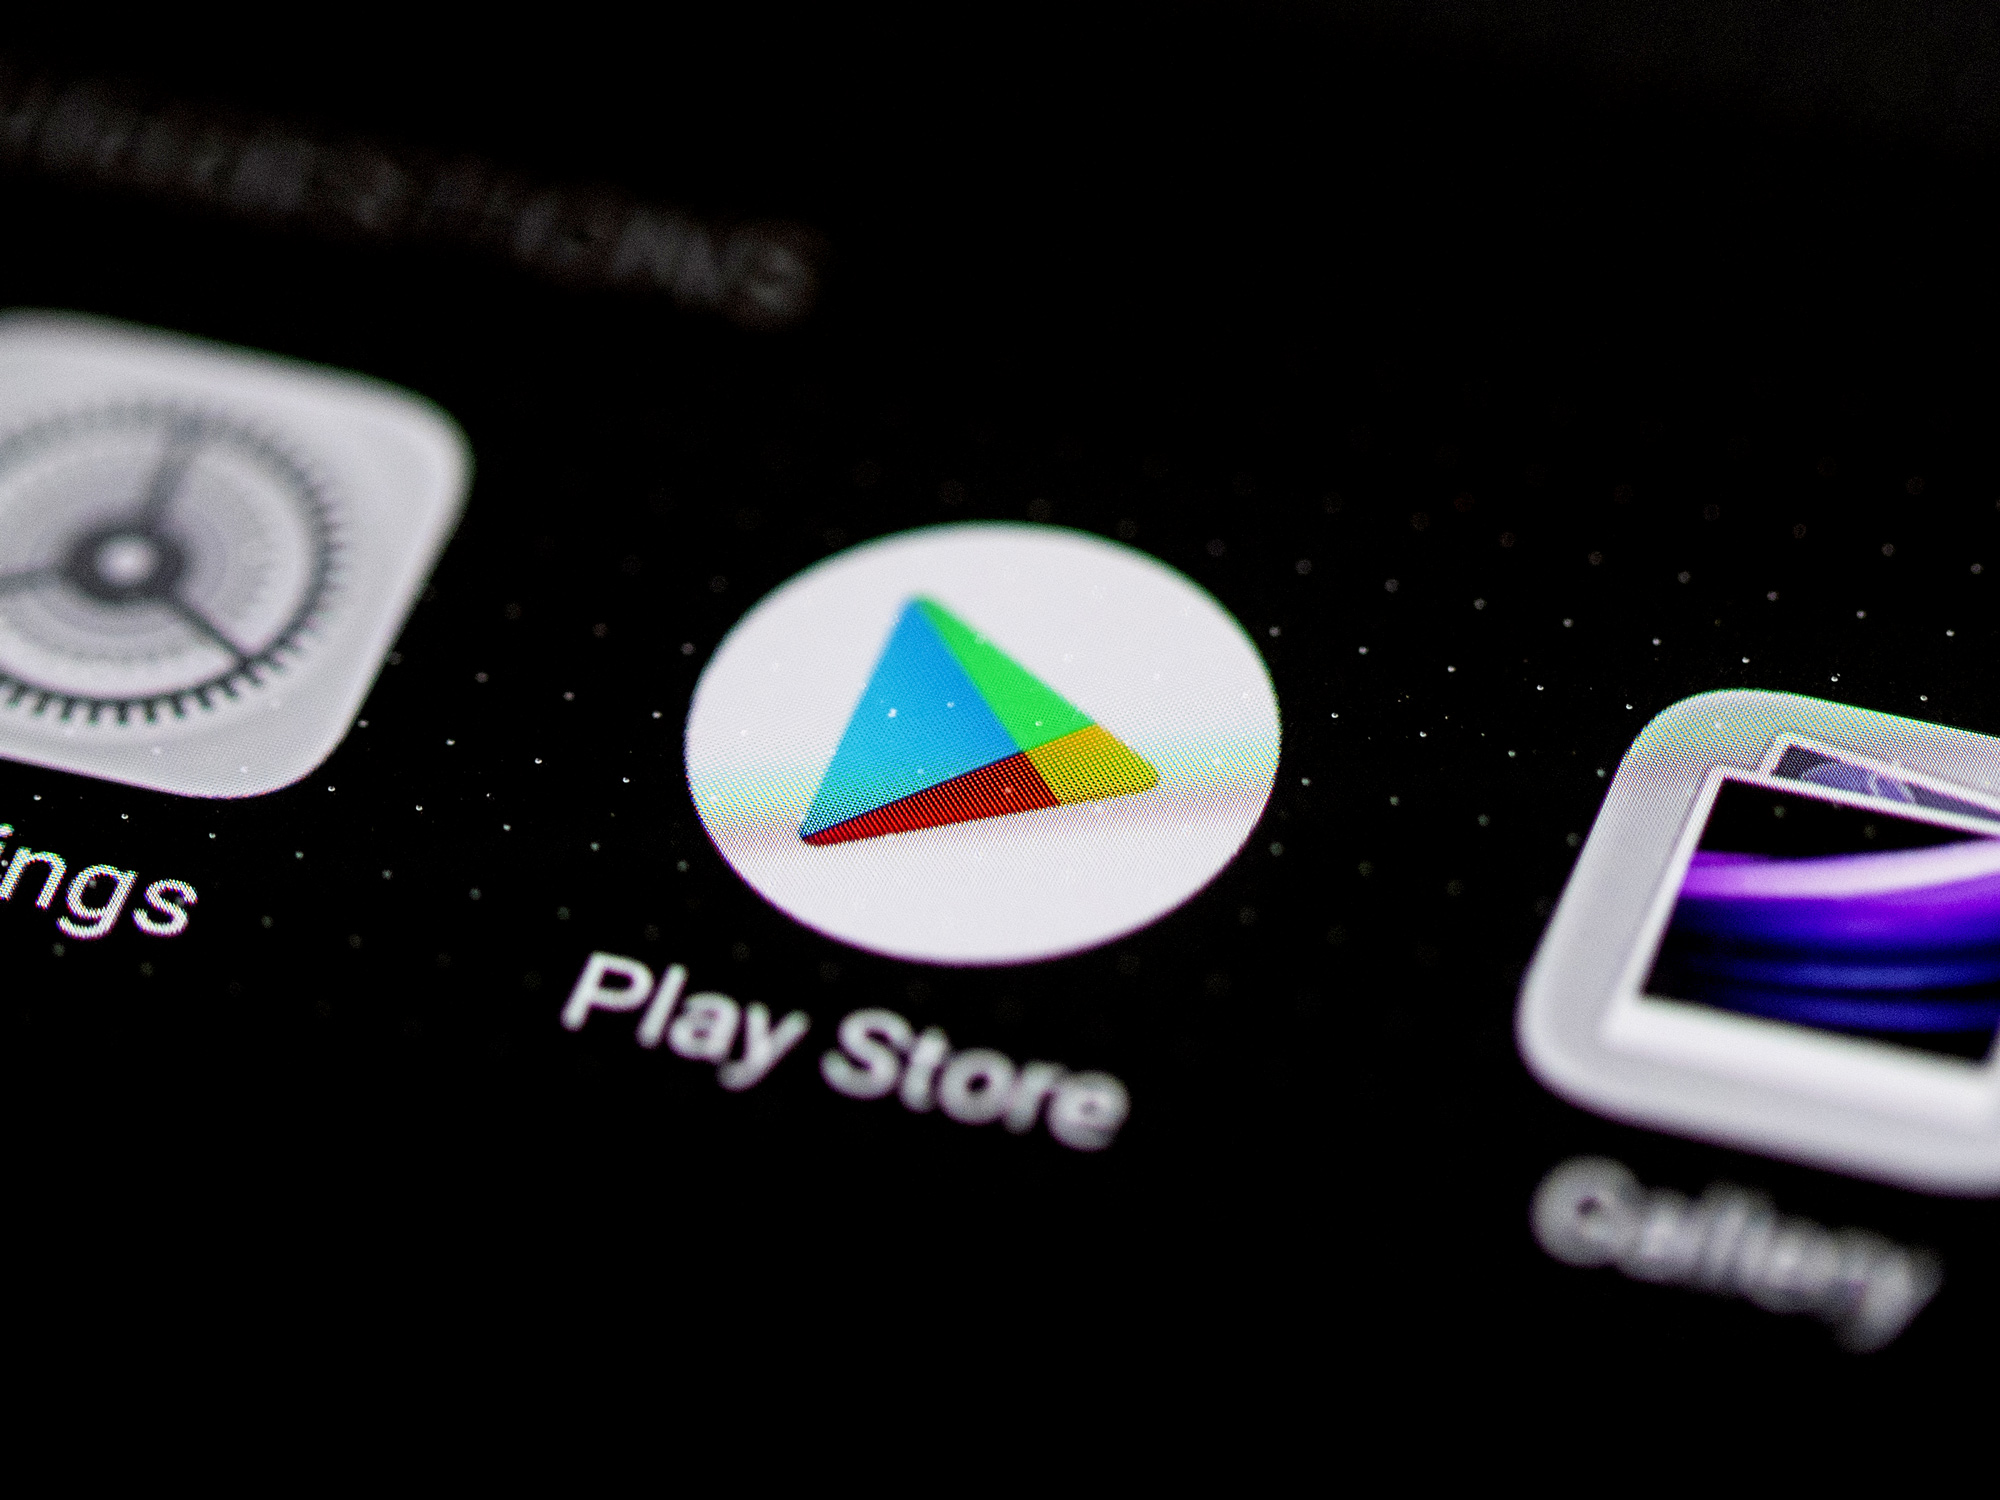 Google opposes Epic Games' Play Store changes, citing competition concerns (Credits: Bloomberg)